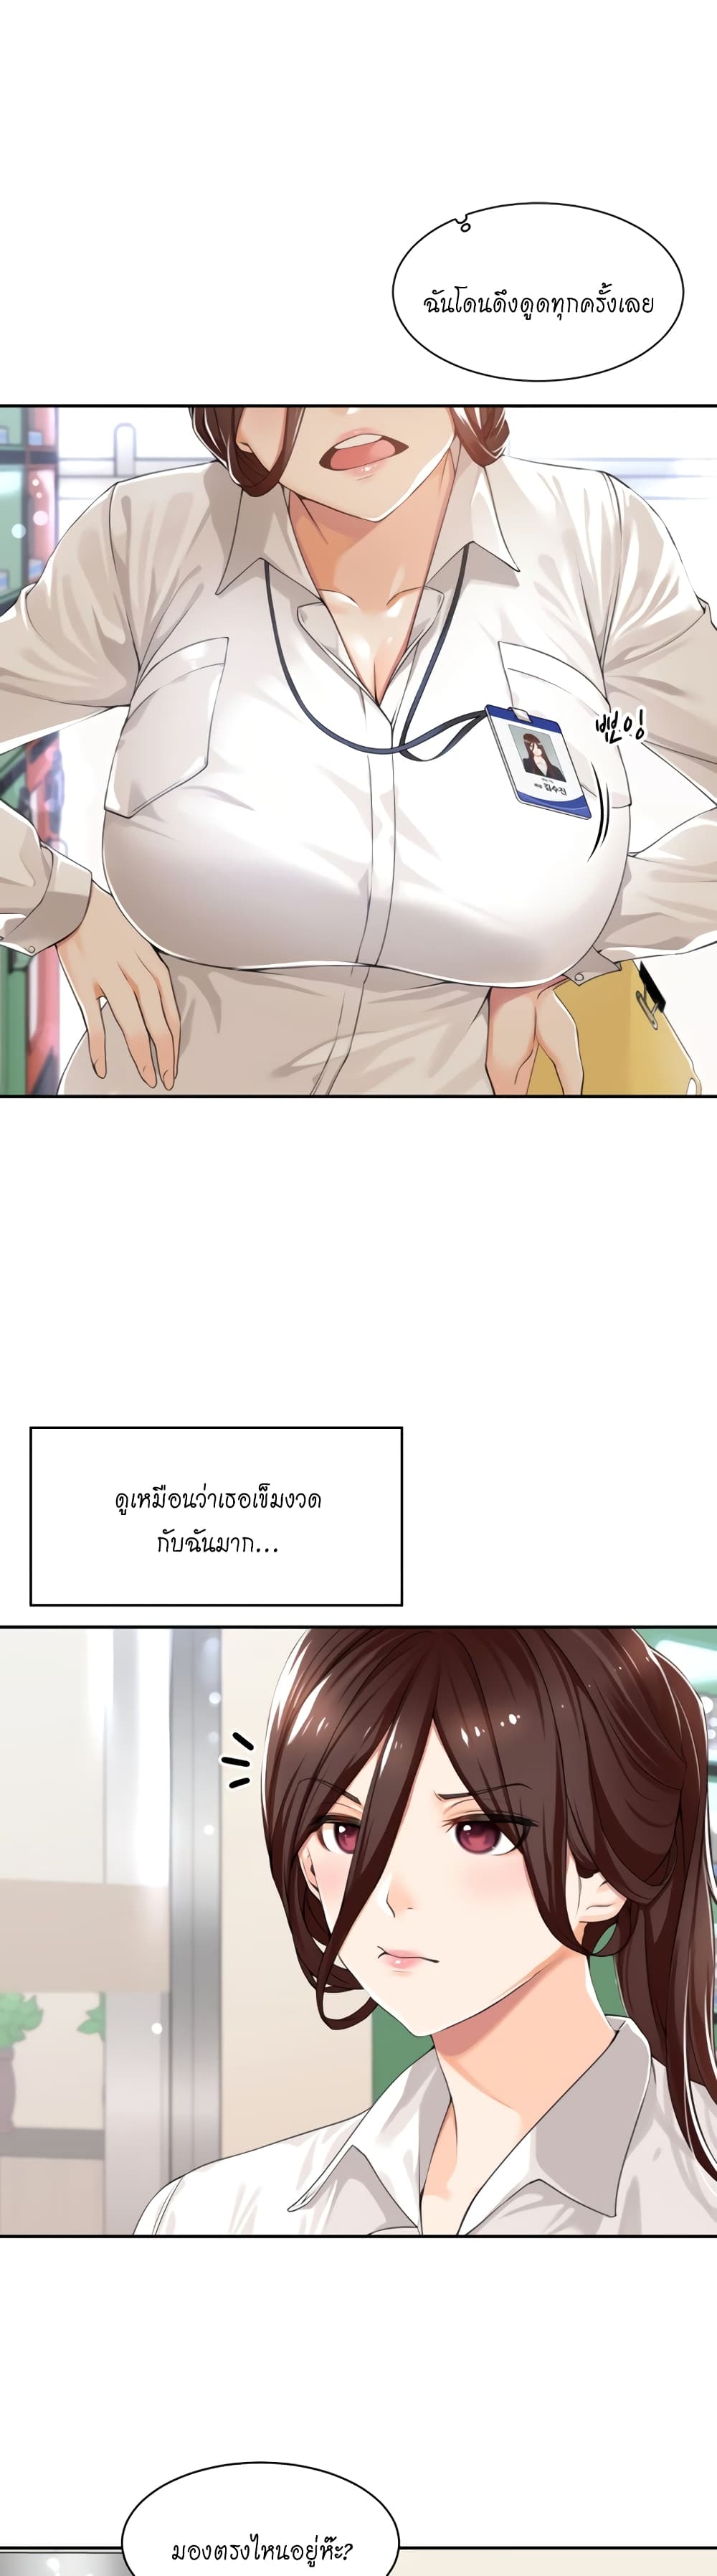 Manager, Please Scold Me ตอนที่ 1 ภาพ 8